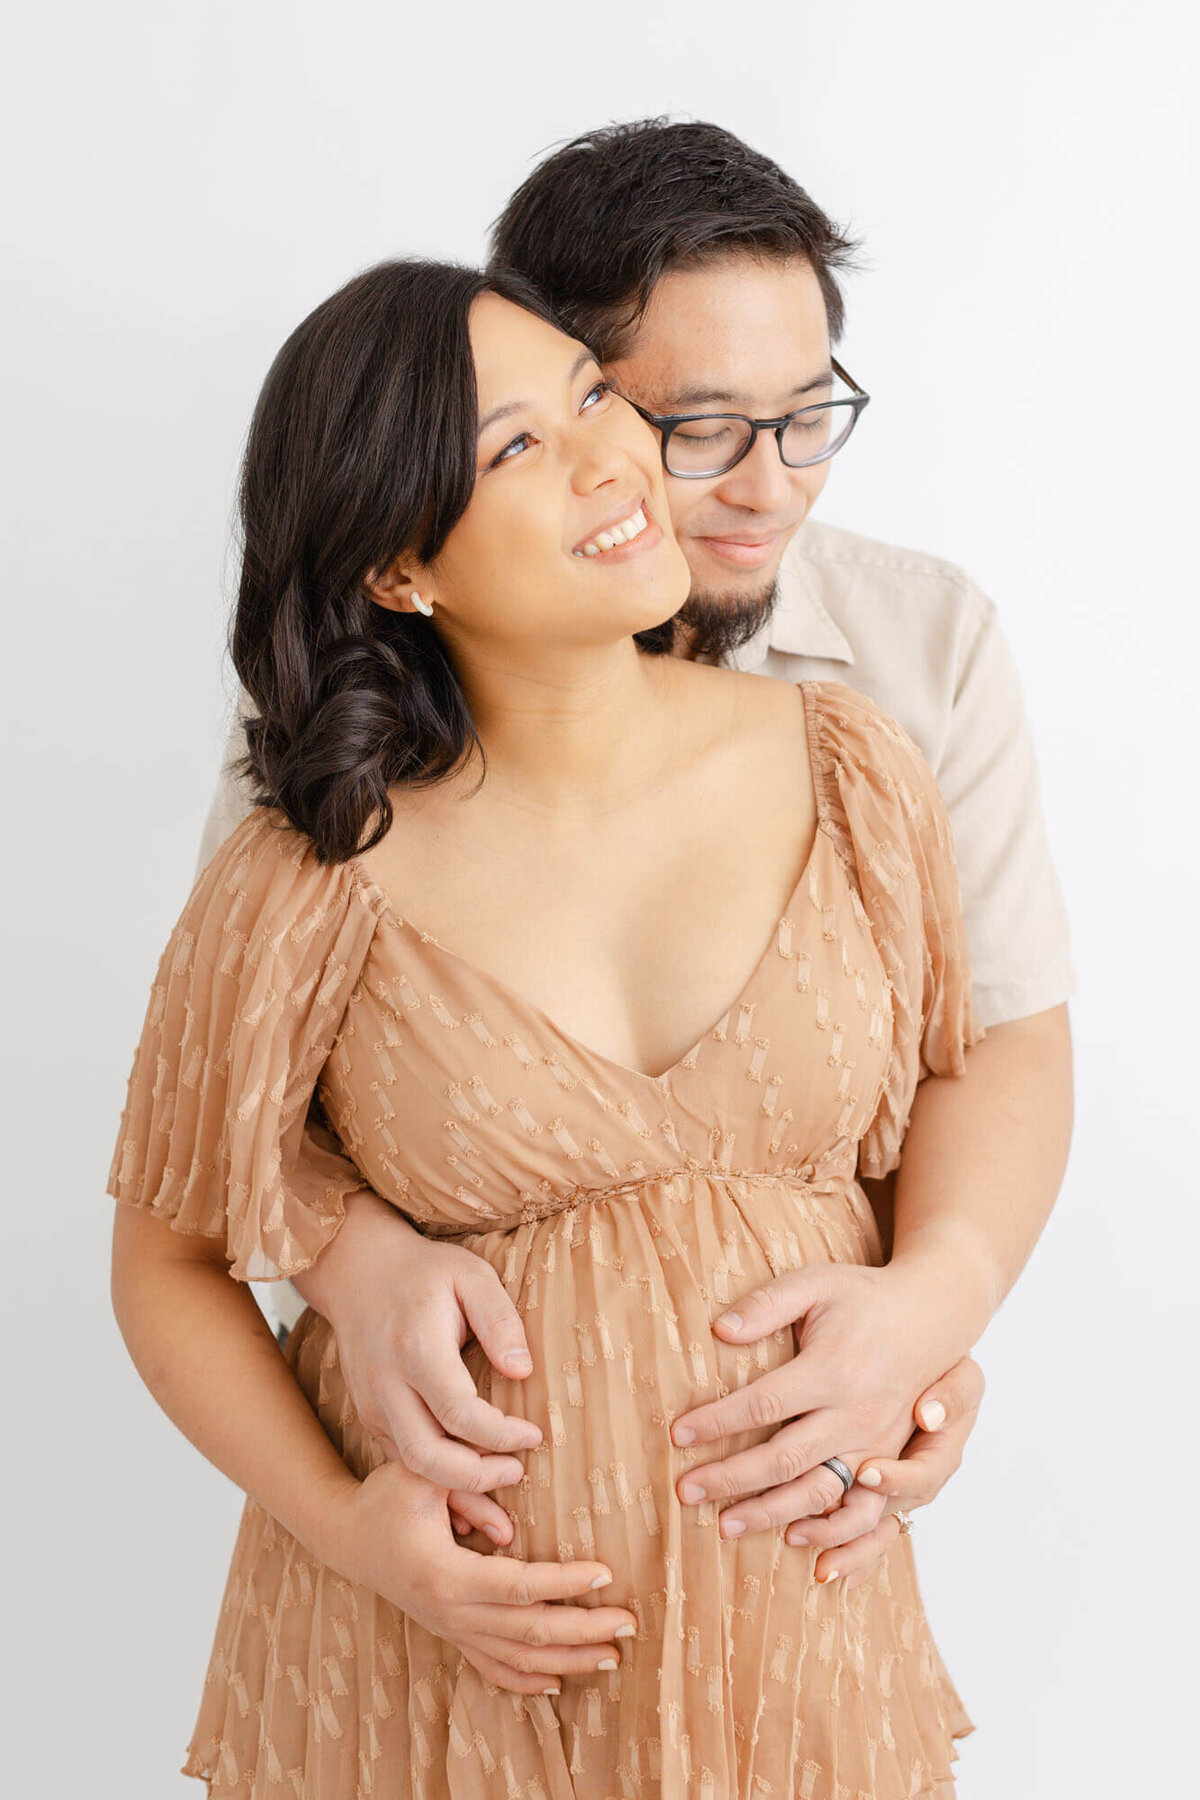 Pregnant woman in a low-cut tan dress holding her belly and looking up towards the light and smiling. Her husband is standing  behind her and has his arms wrapped around her belly. His eyes are closed and he has a small grin on his face. There is a plain white backdrop behind them at an all-white portland maternity portrait studio. Photo by Ashlie Behm Photography